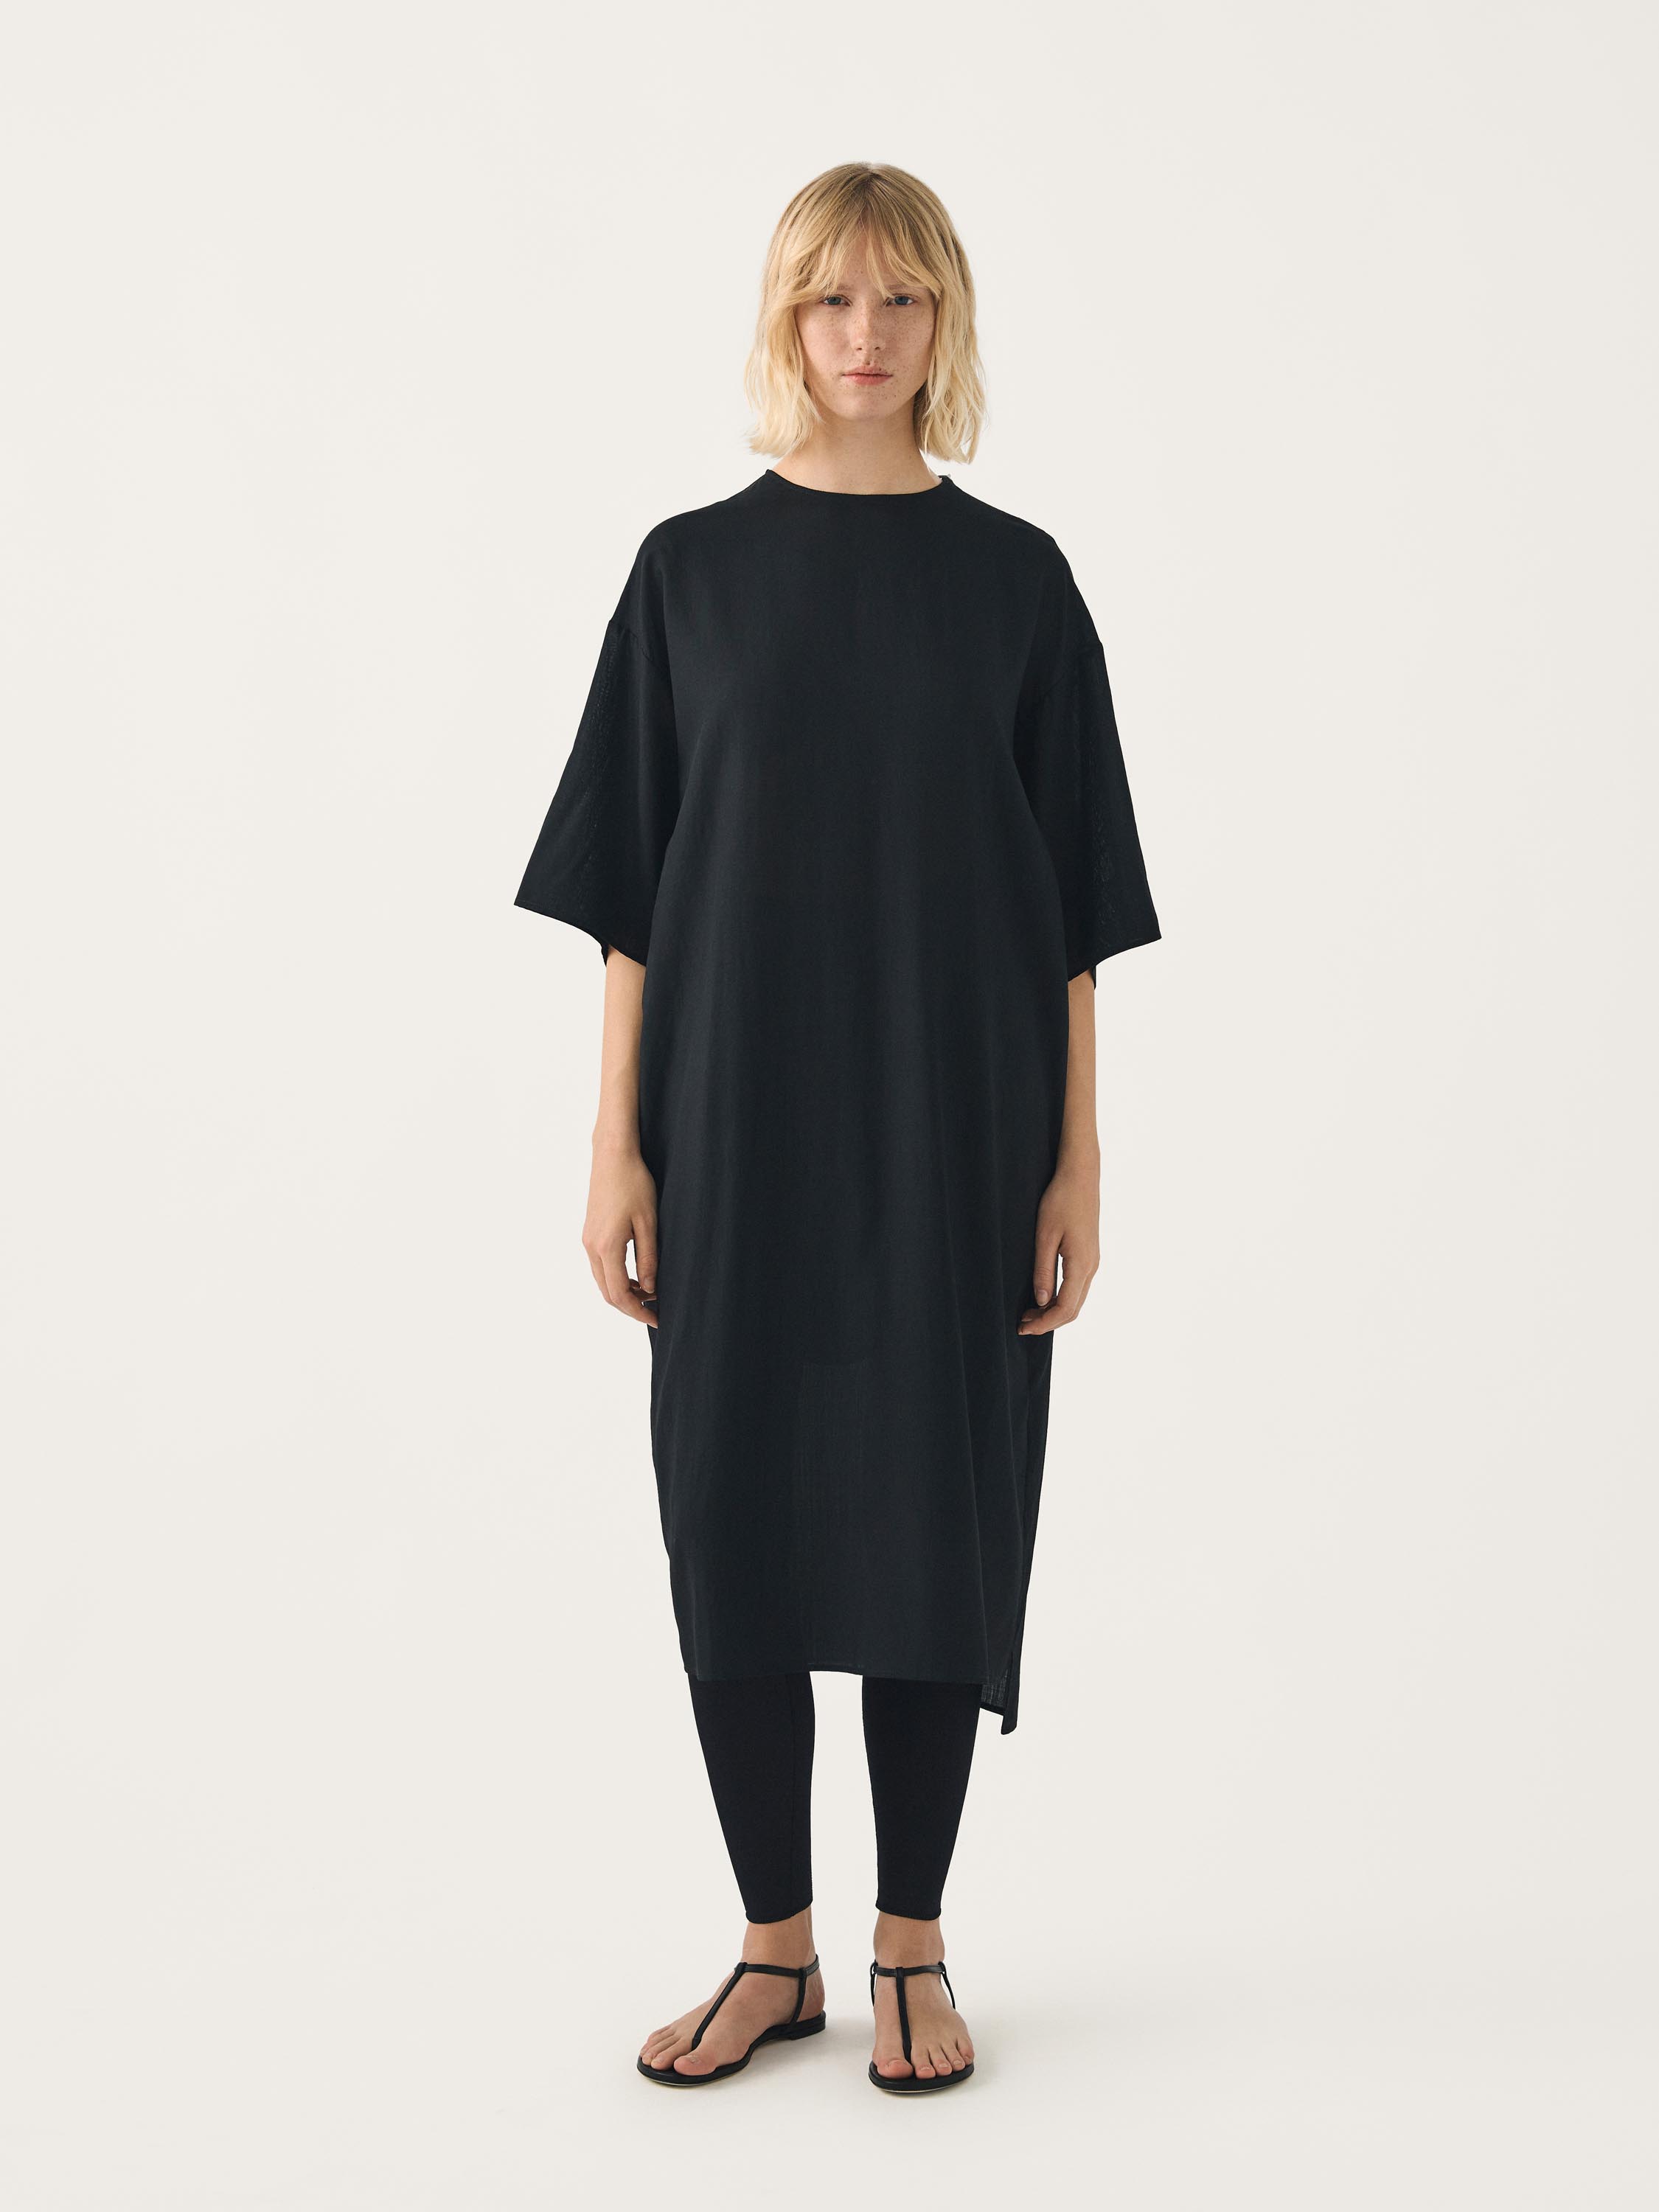 KEON woven t-shirt dress with sleeves elbow-length | FFORME